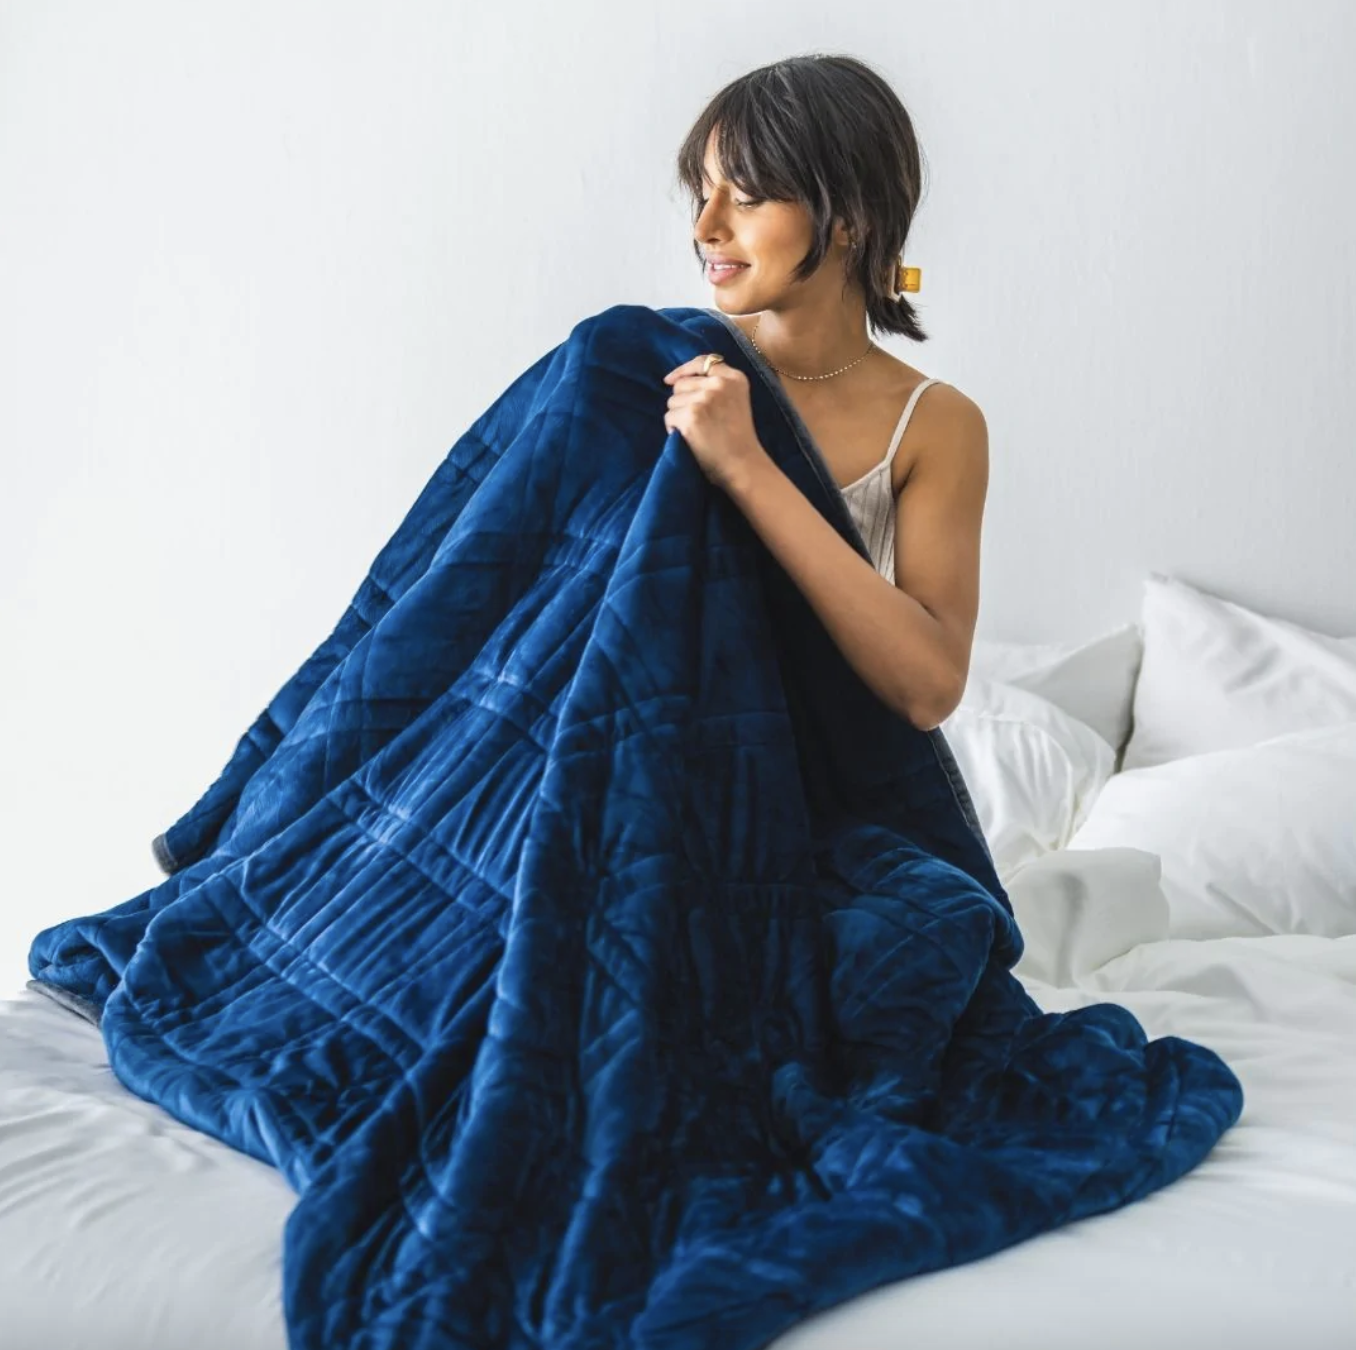 model snuggling with navy minky weighted blanket